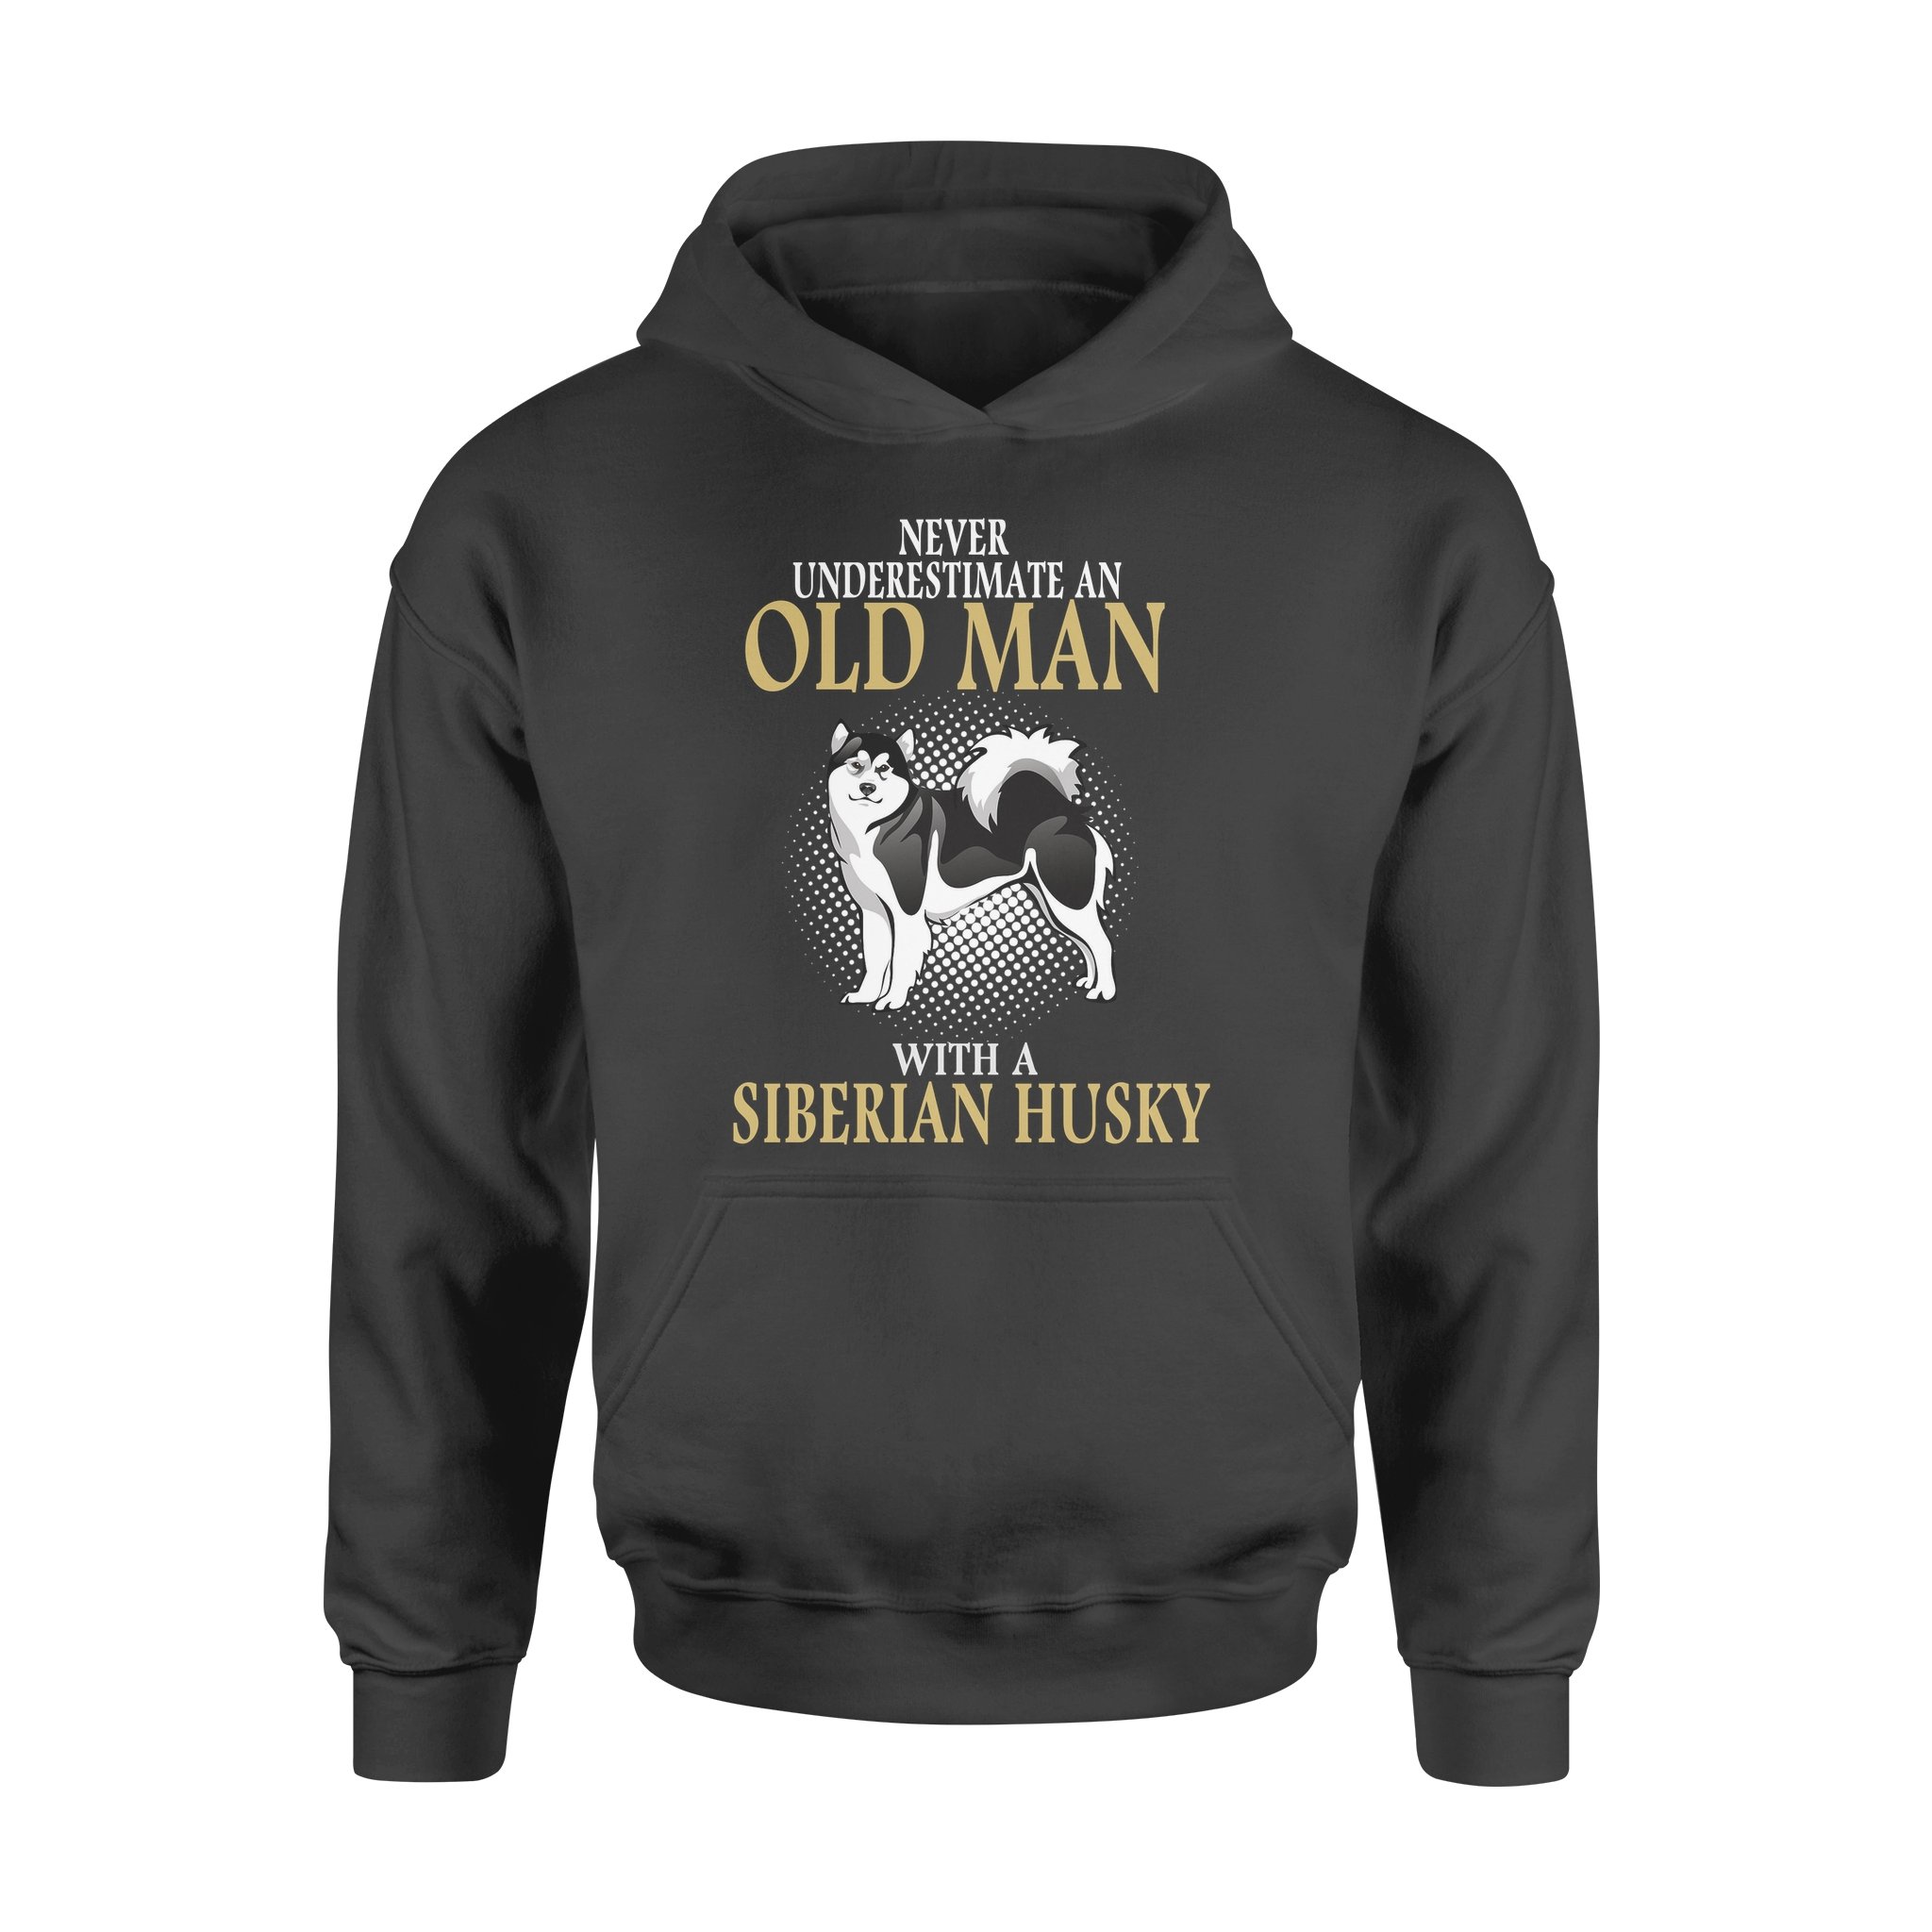 Never Underestimate An Old Man With A Siberian Husky – Standard Hoodie